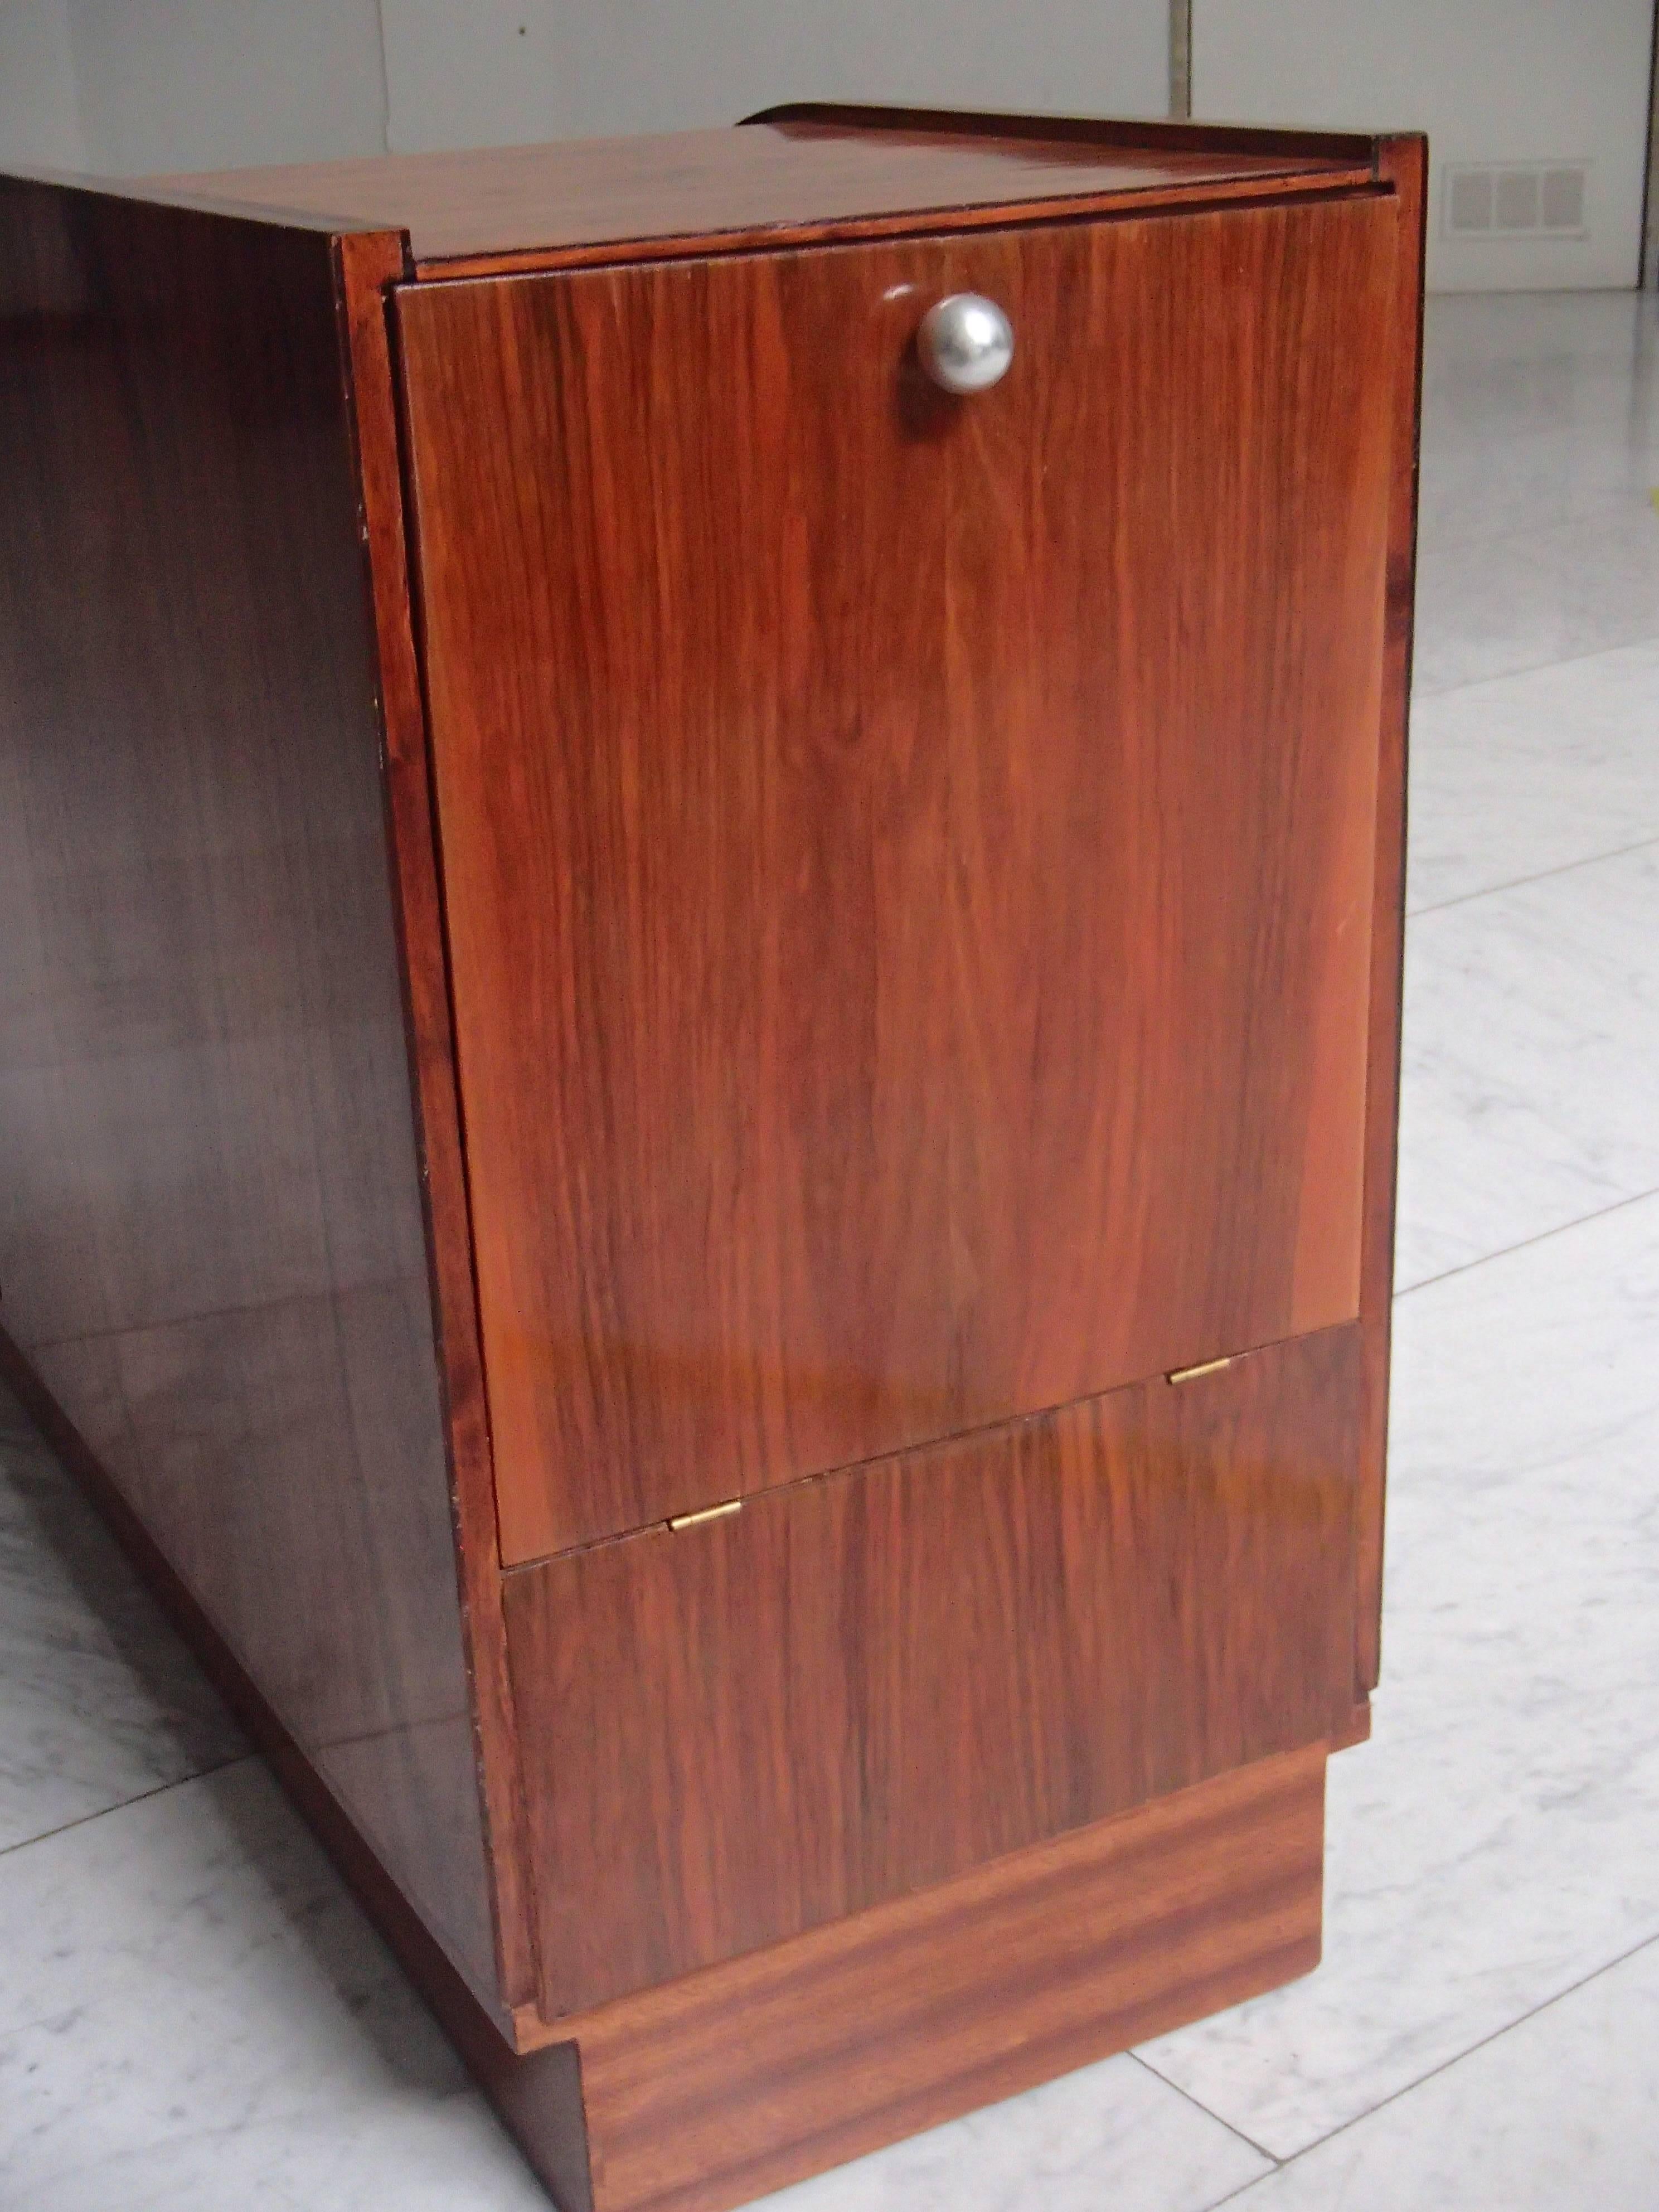 Art Deco rosewood bar with mother-of-pearl inlays and chrome elements.